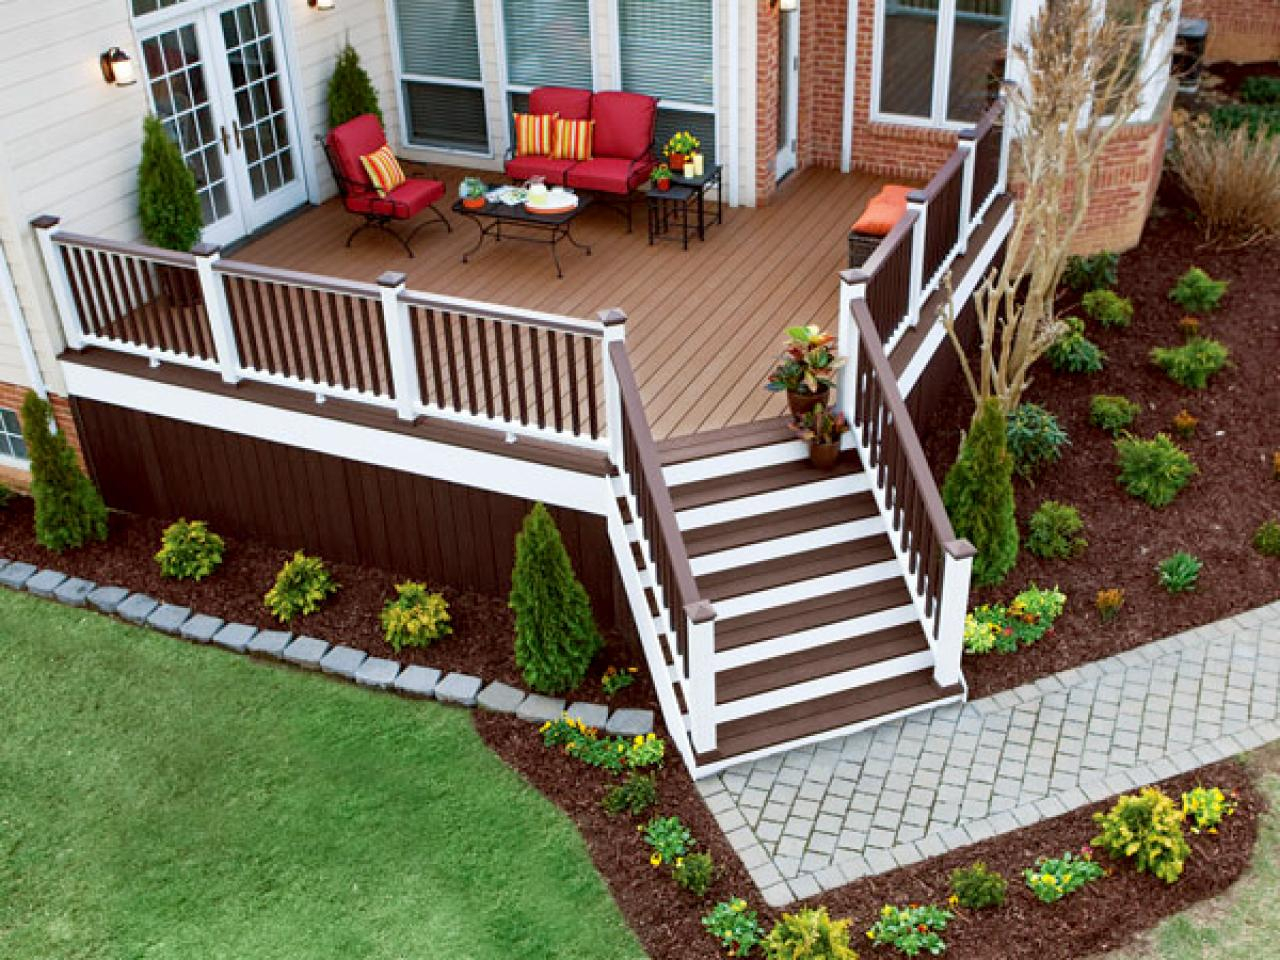 Small Decks For Front Of House Garden Ideas Terraced Public intended for dimensions 1280 X 960